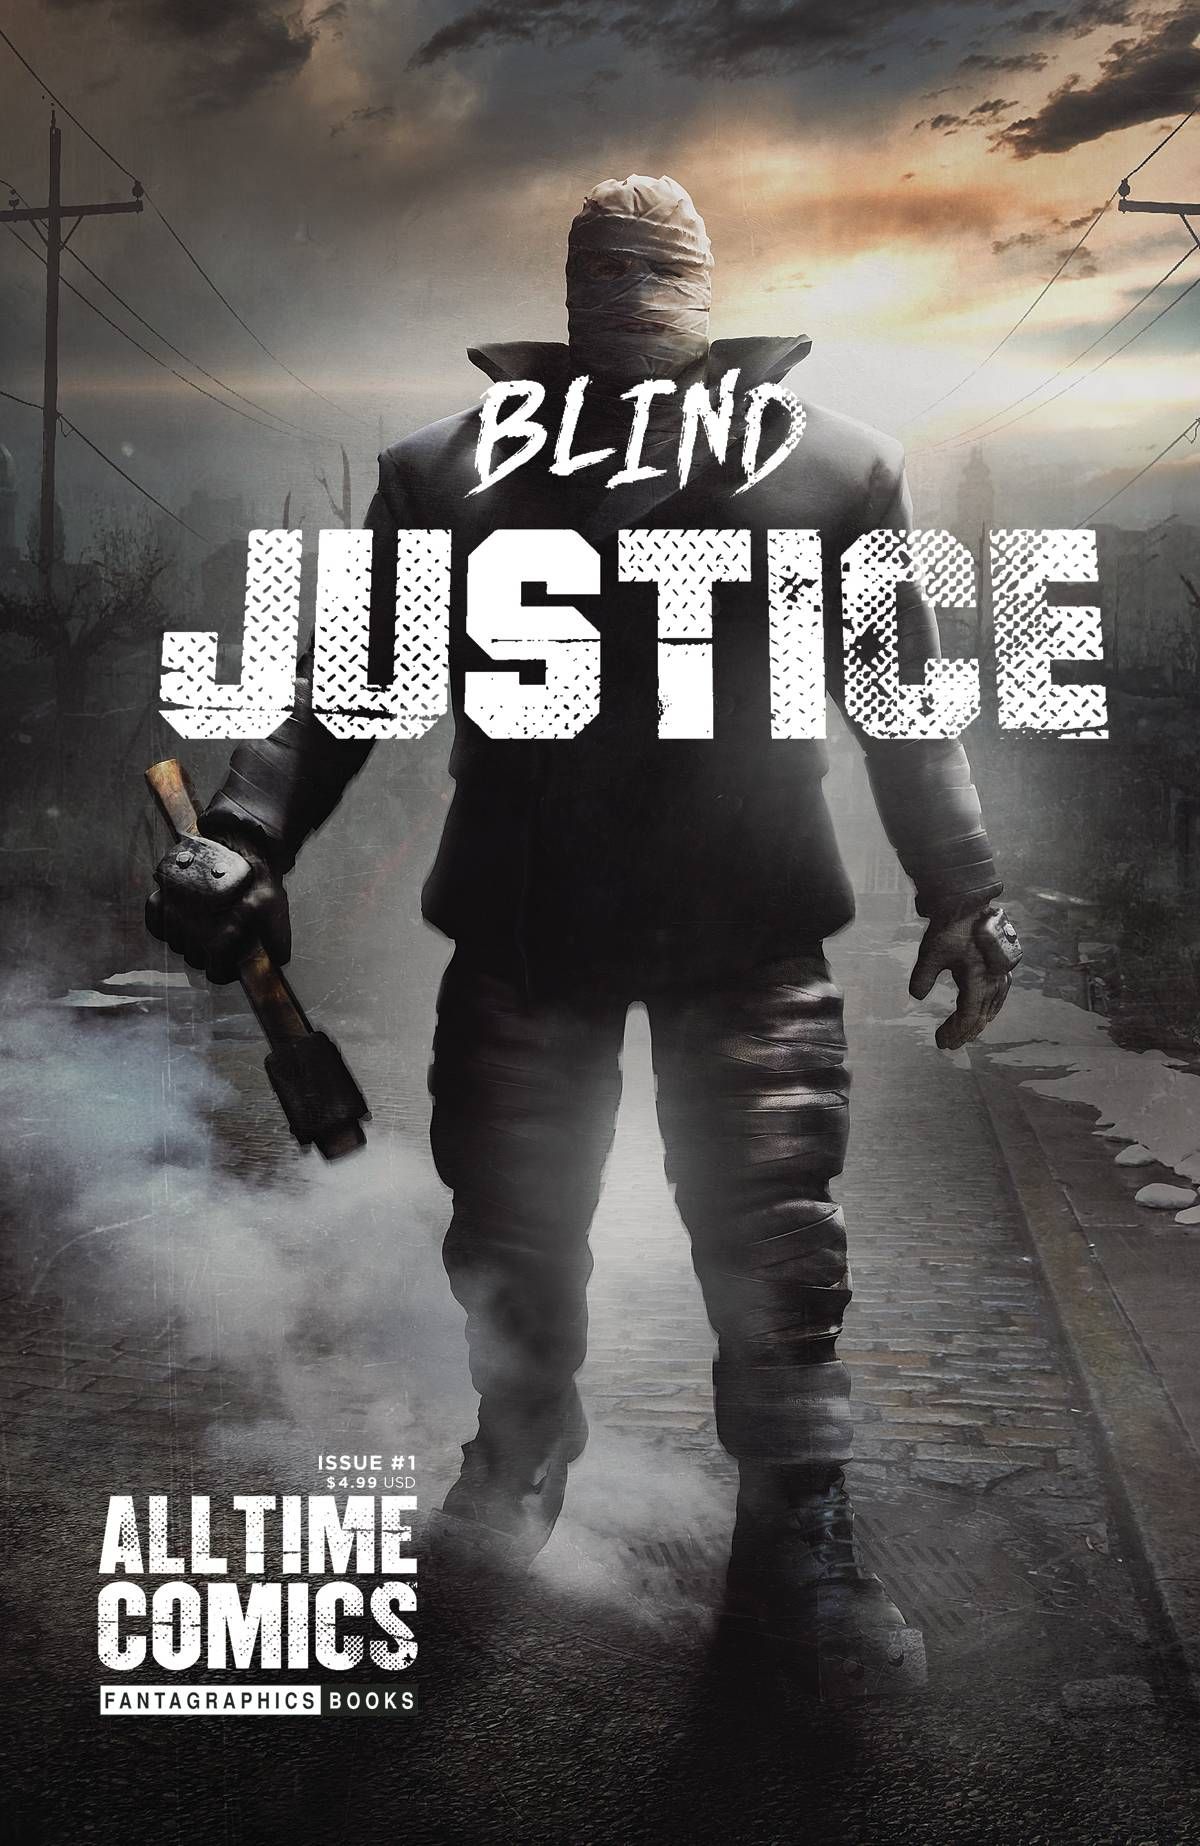 All Time Comics: Blind Justice #1 Comic